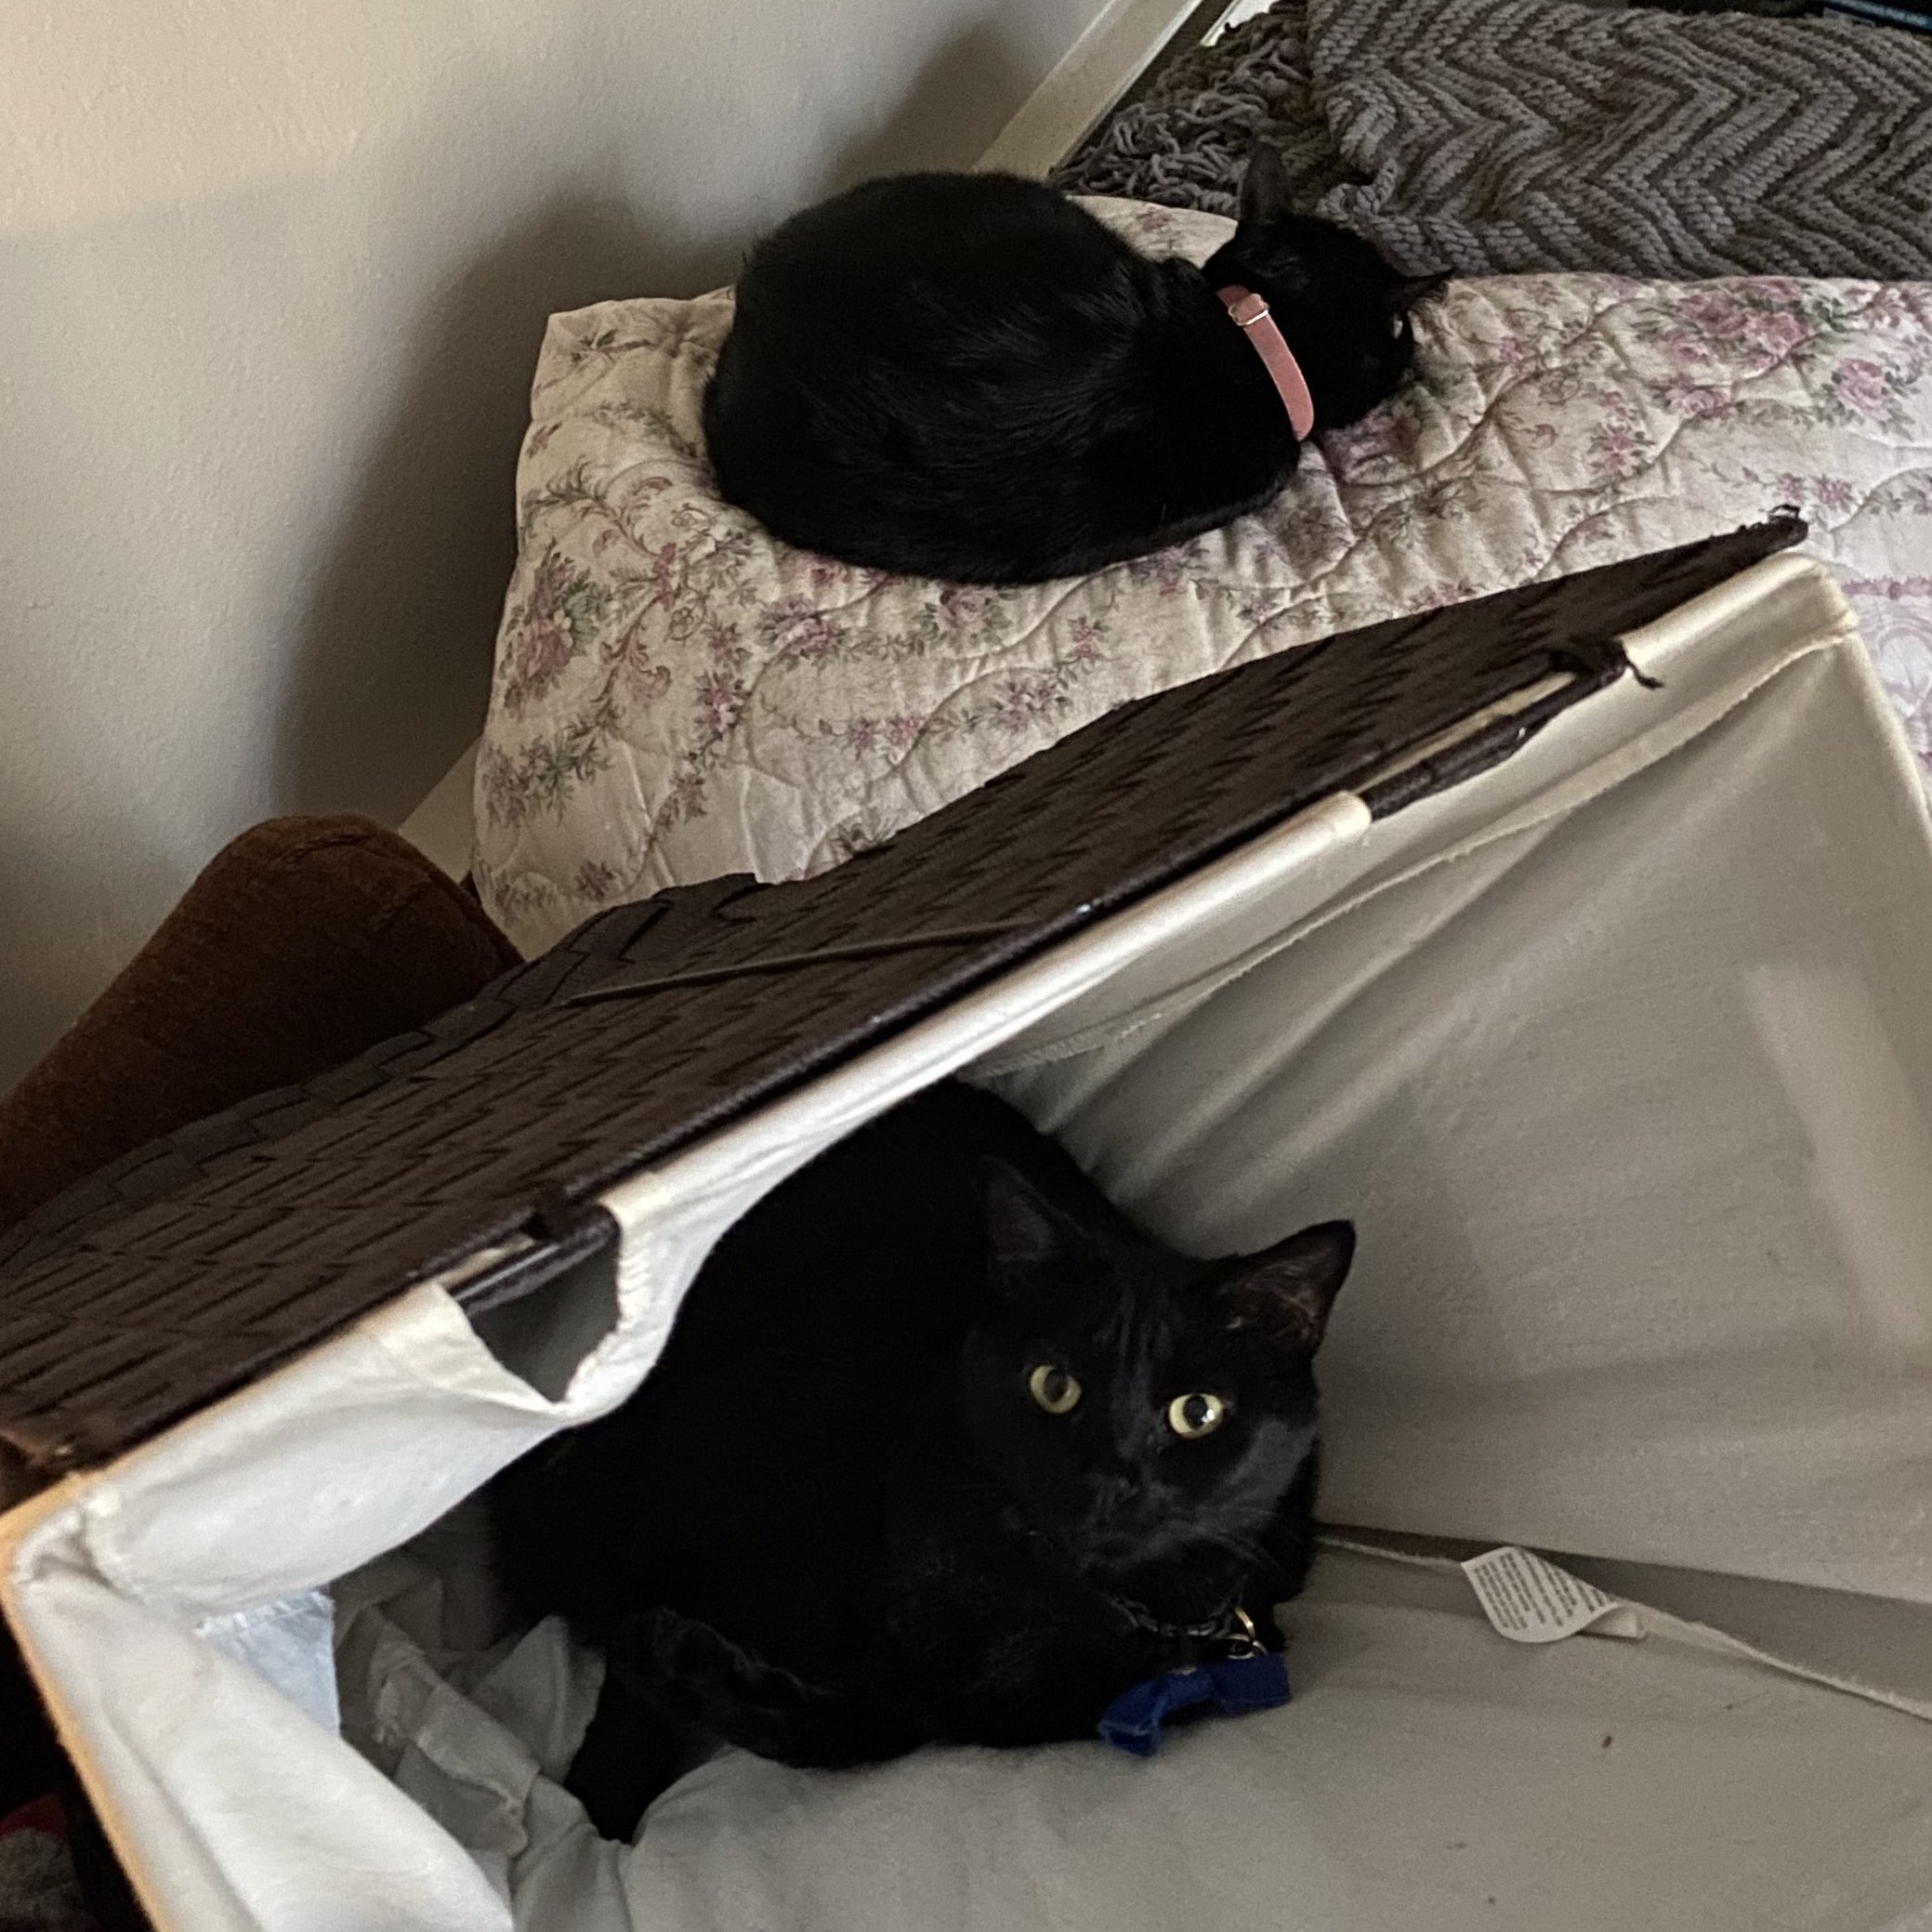 a black cat sleeps on a blanket. another black cat sits in an overturned hamper and stares at the camera.